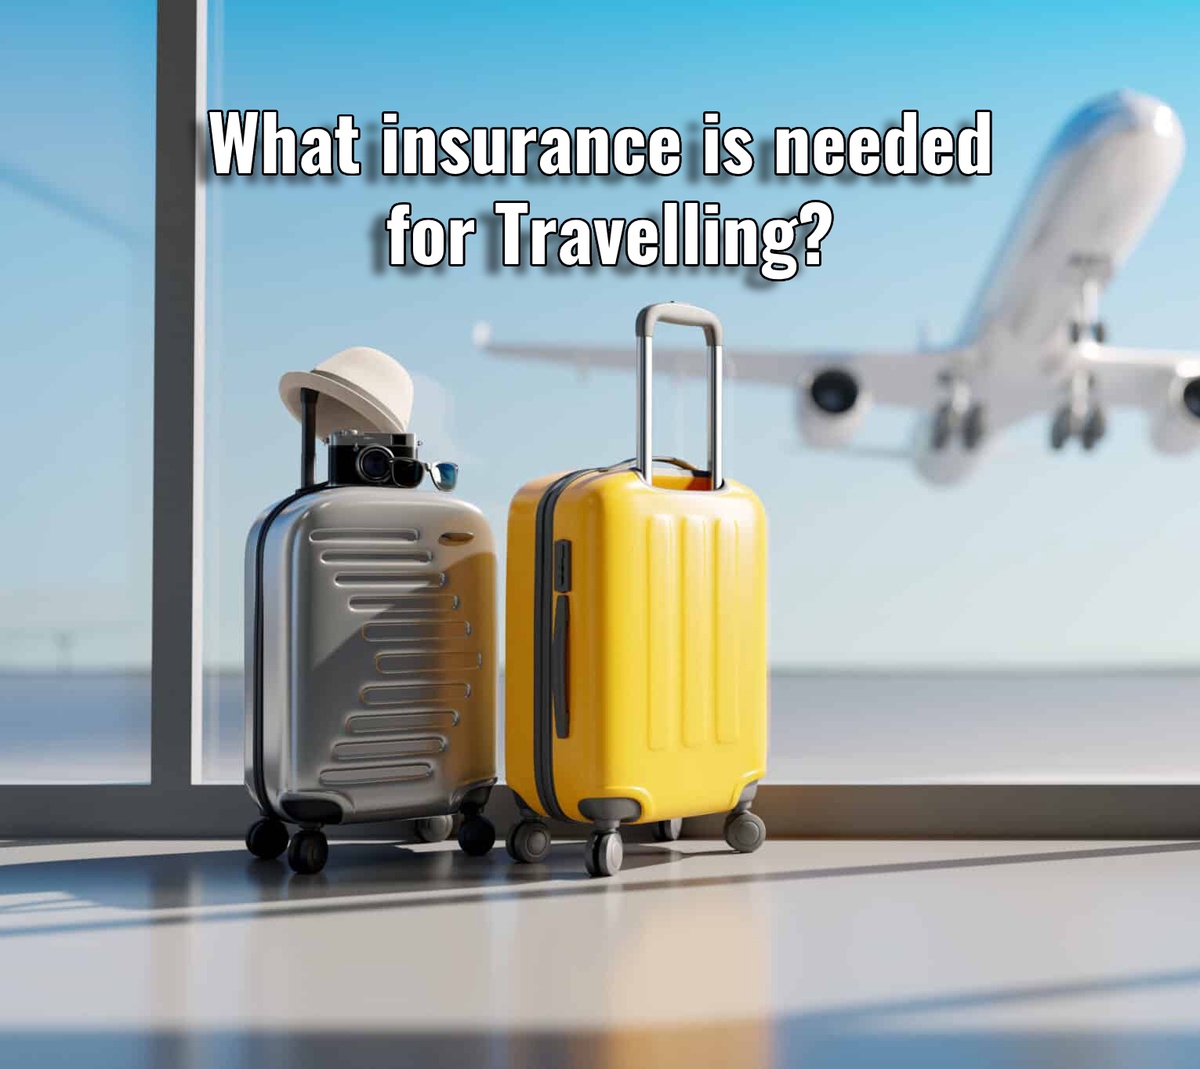 What insurance is needed for Travelling?